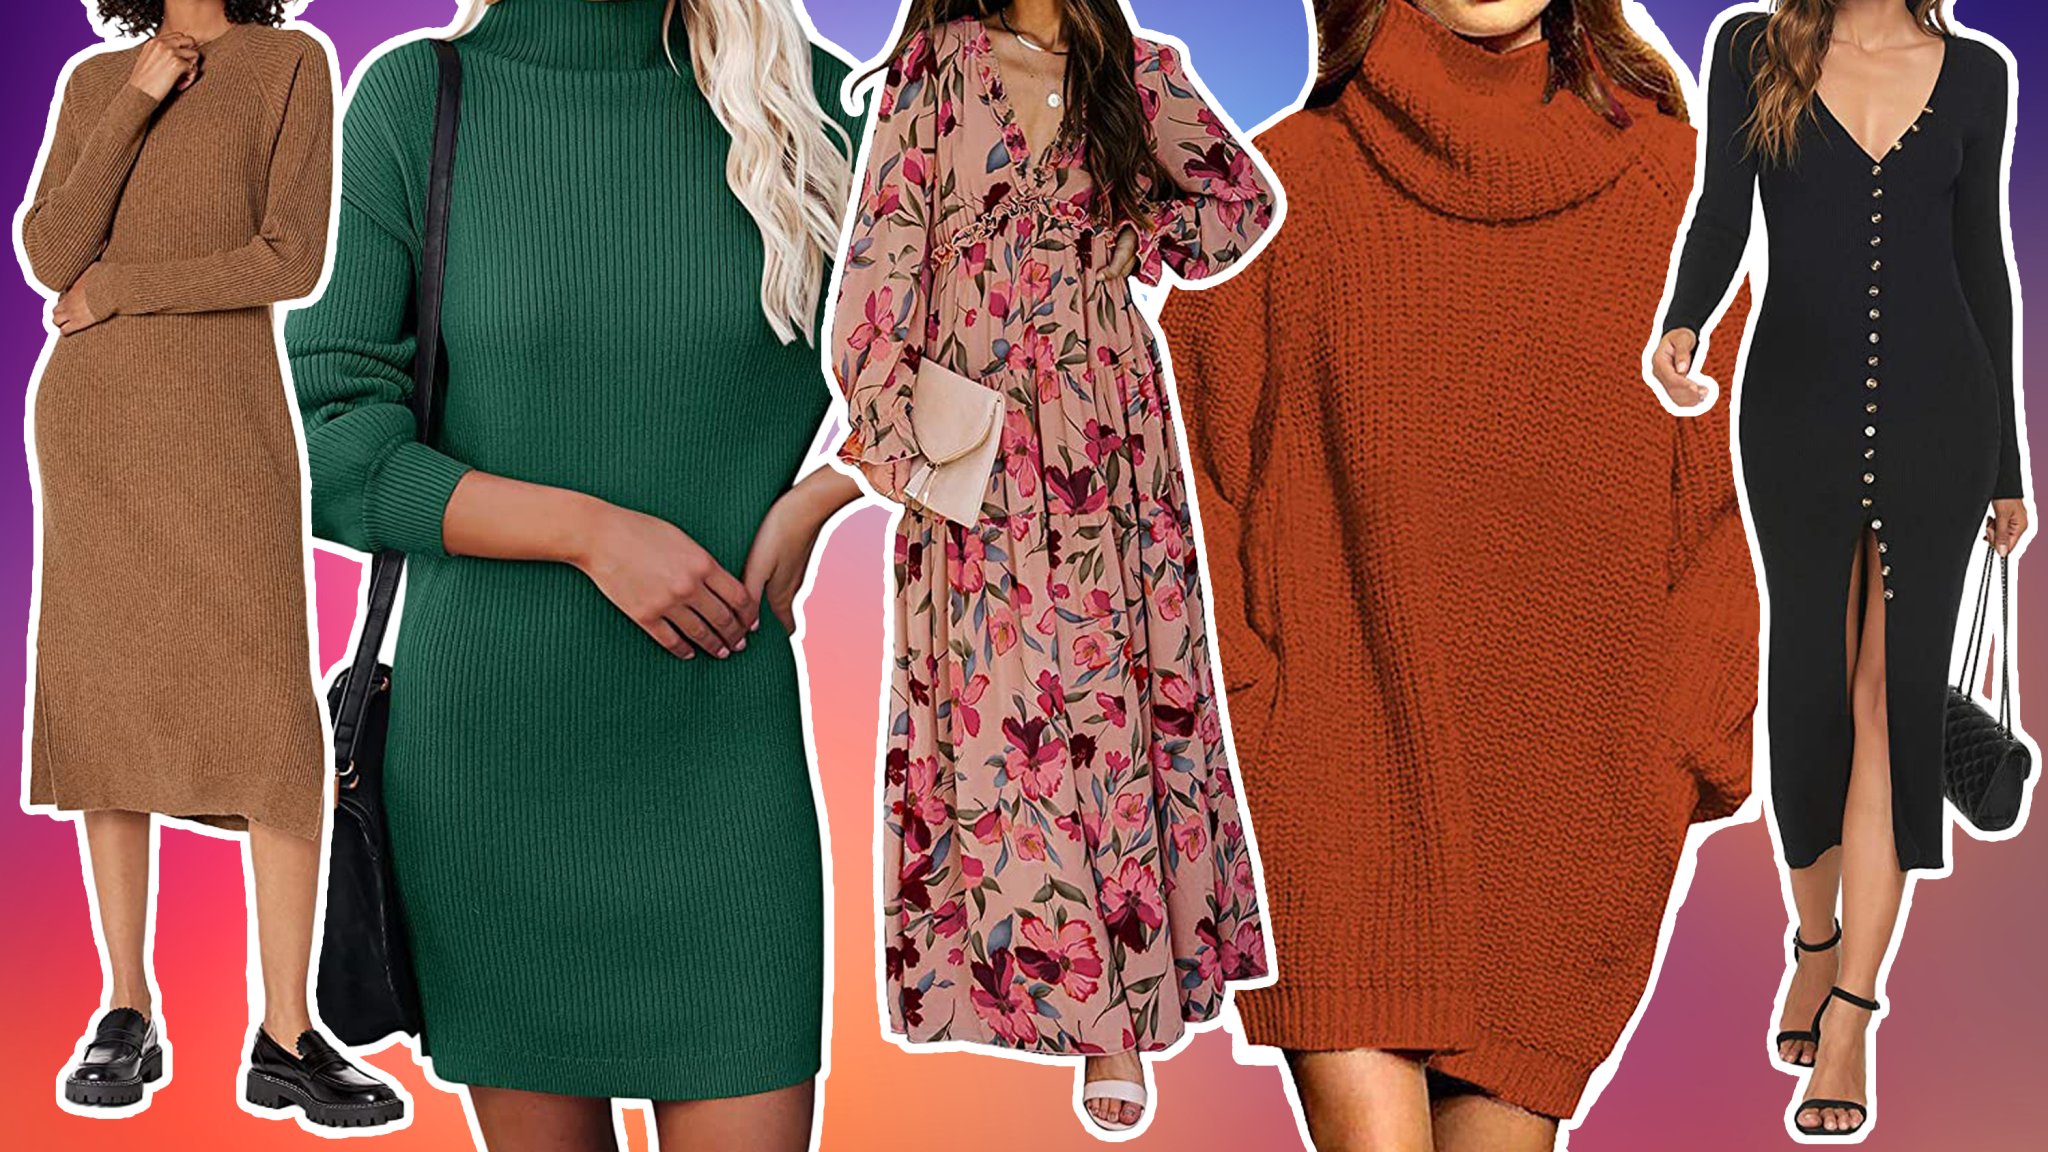 The 21 Best Winter Dresses on Amazon, According to Reviews